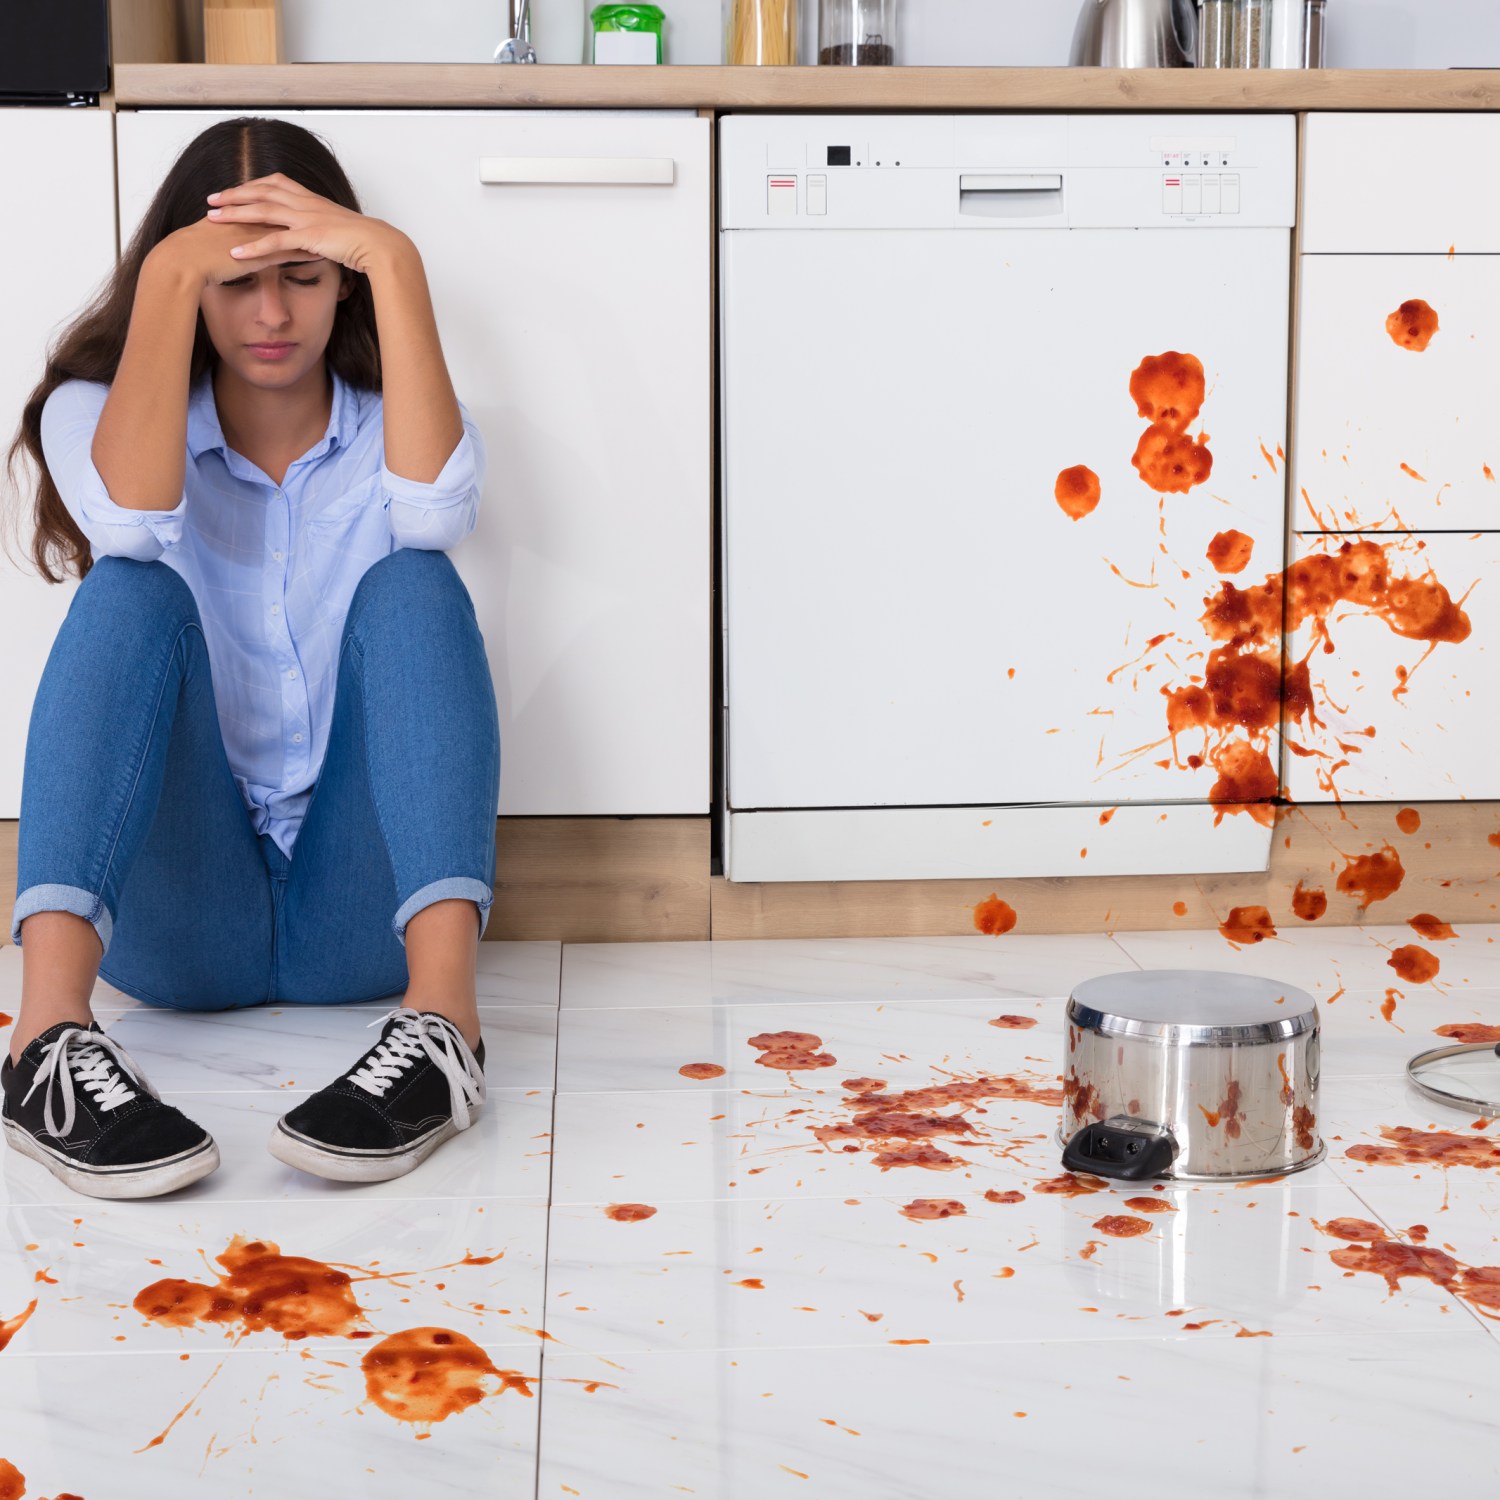 unhappy woman sitting on white kitchen floor with spilled food on the floor and white kitchen cabients